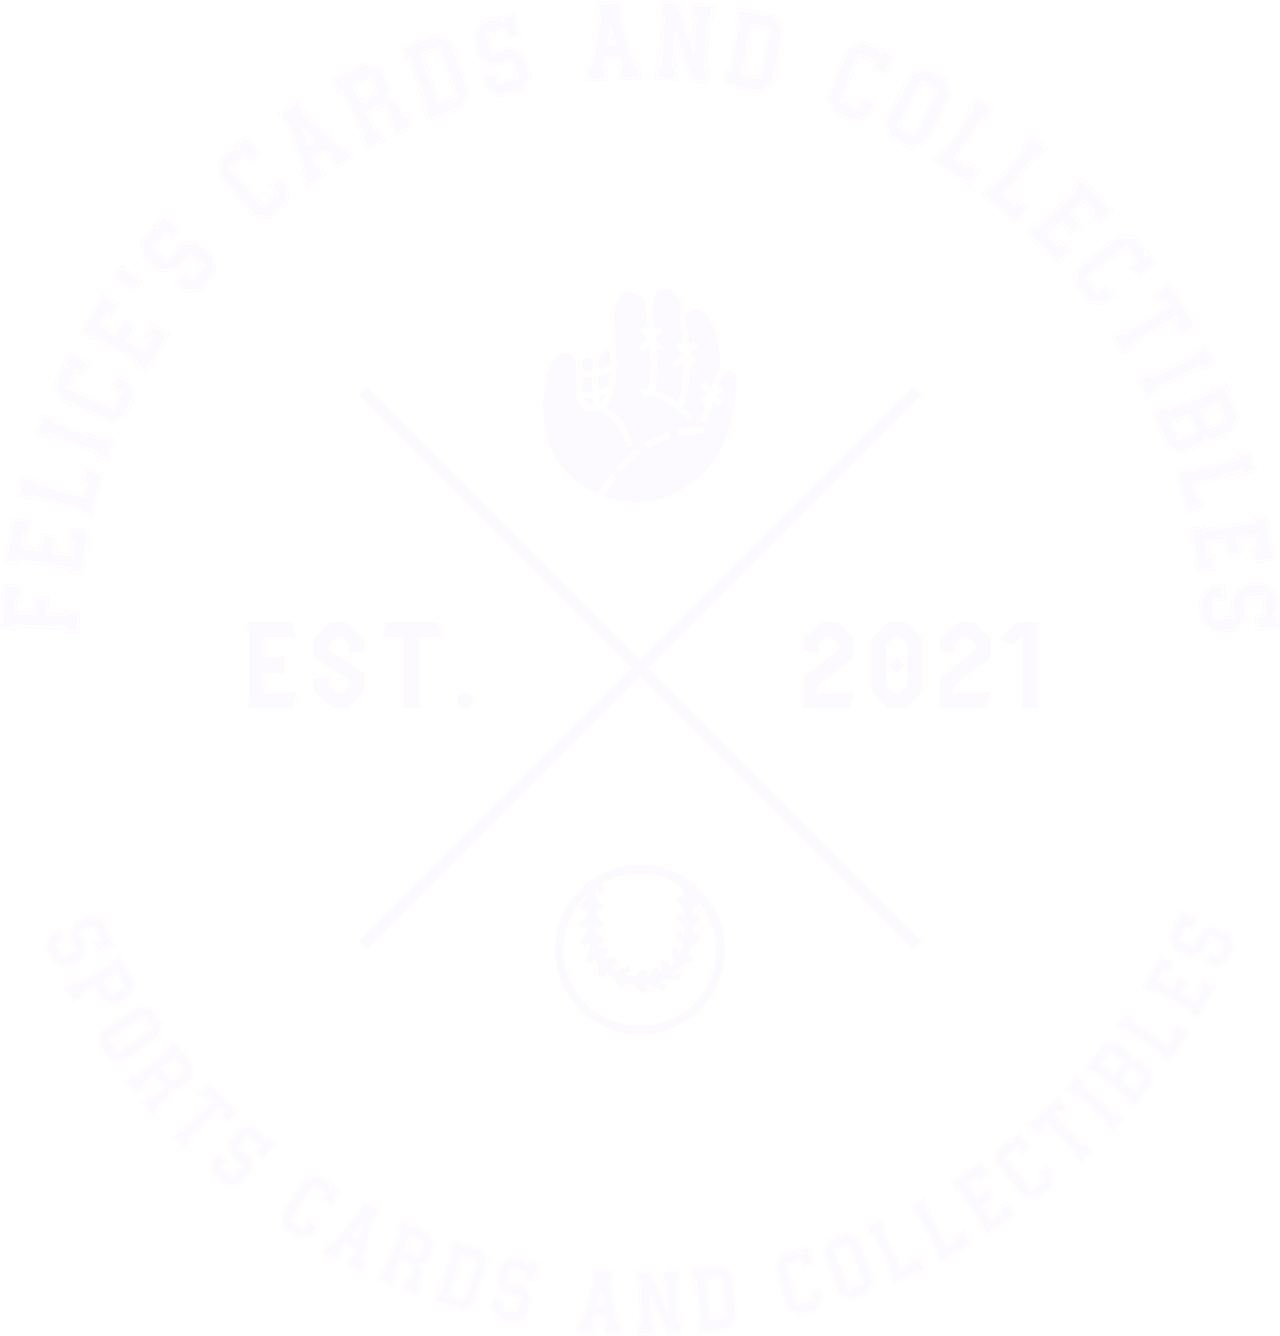 Felice's Cards and Collectibles's logo